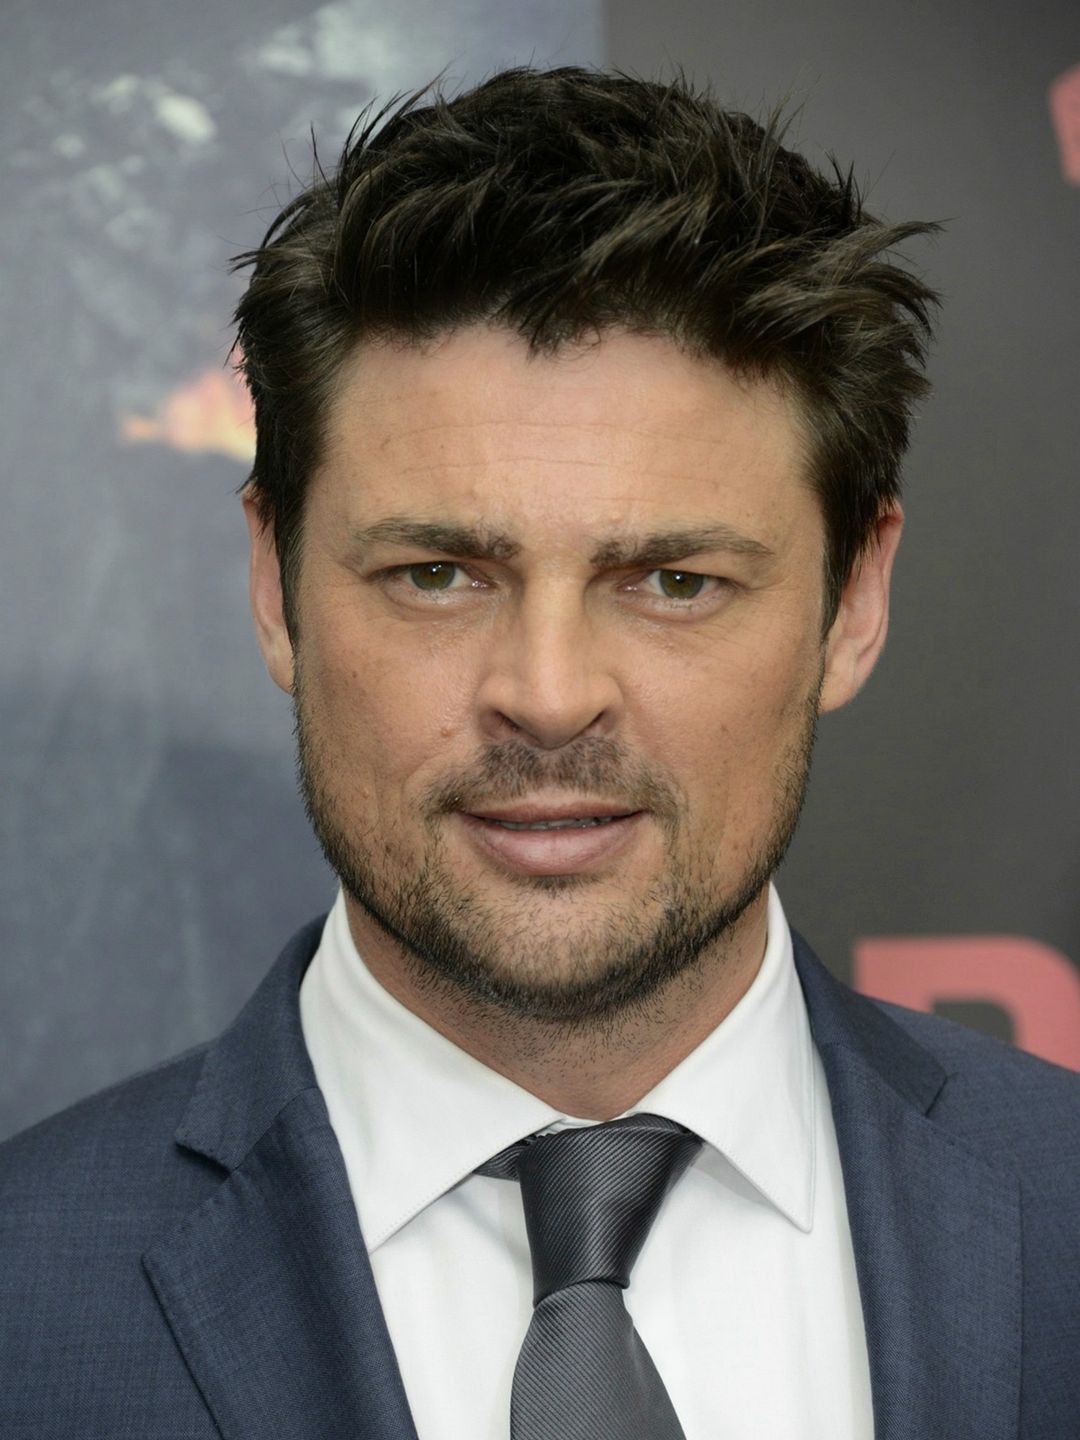 Karl Urban who is his mother